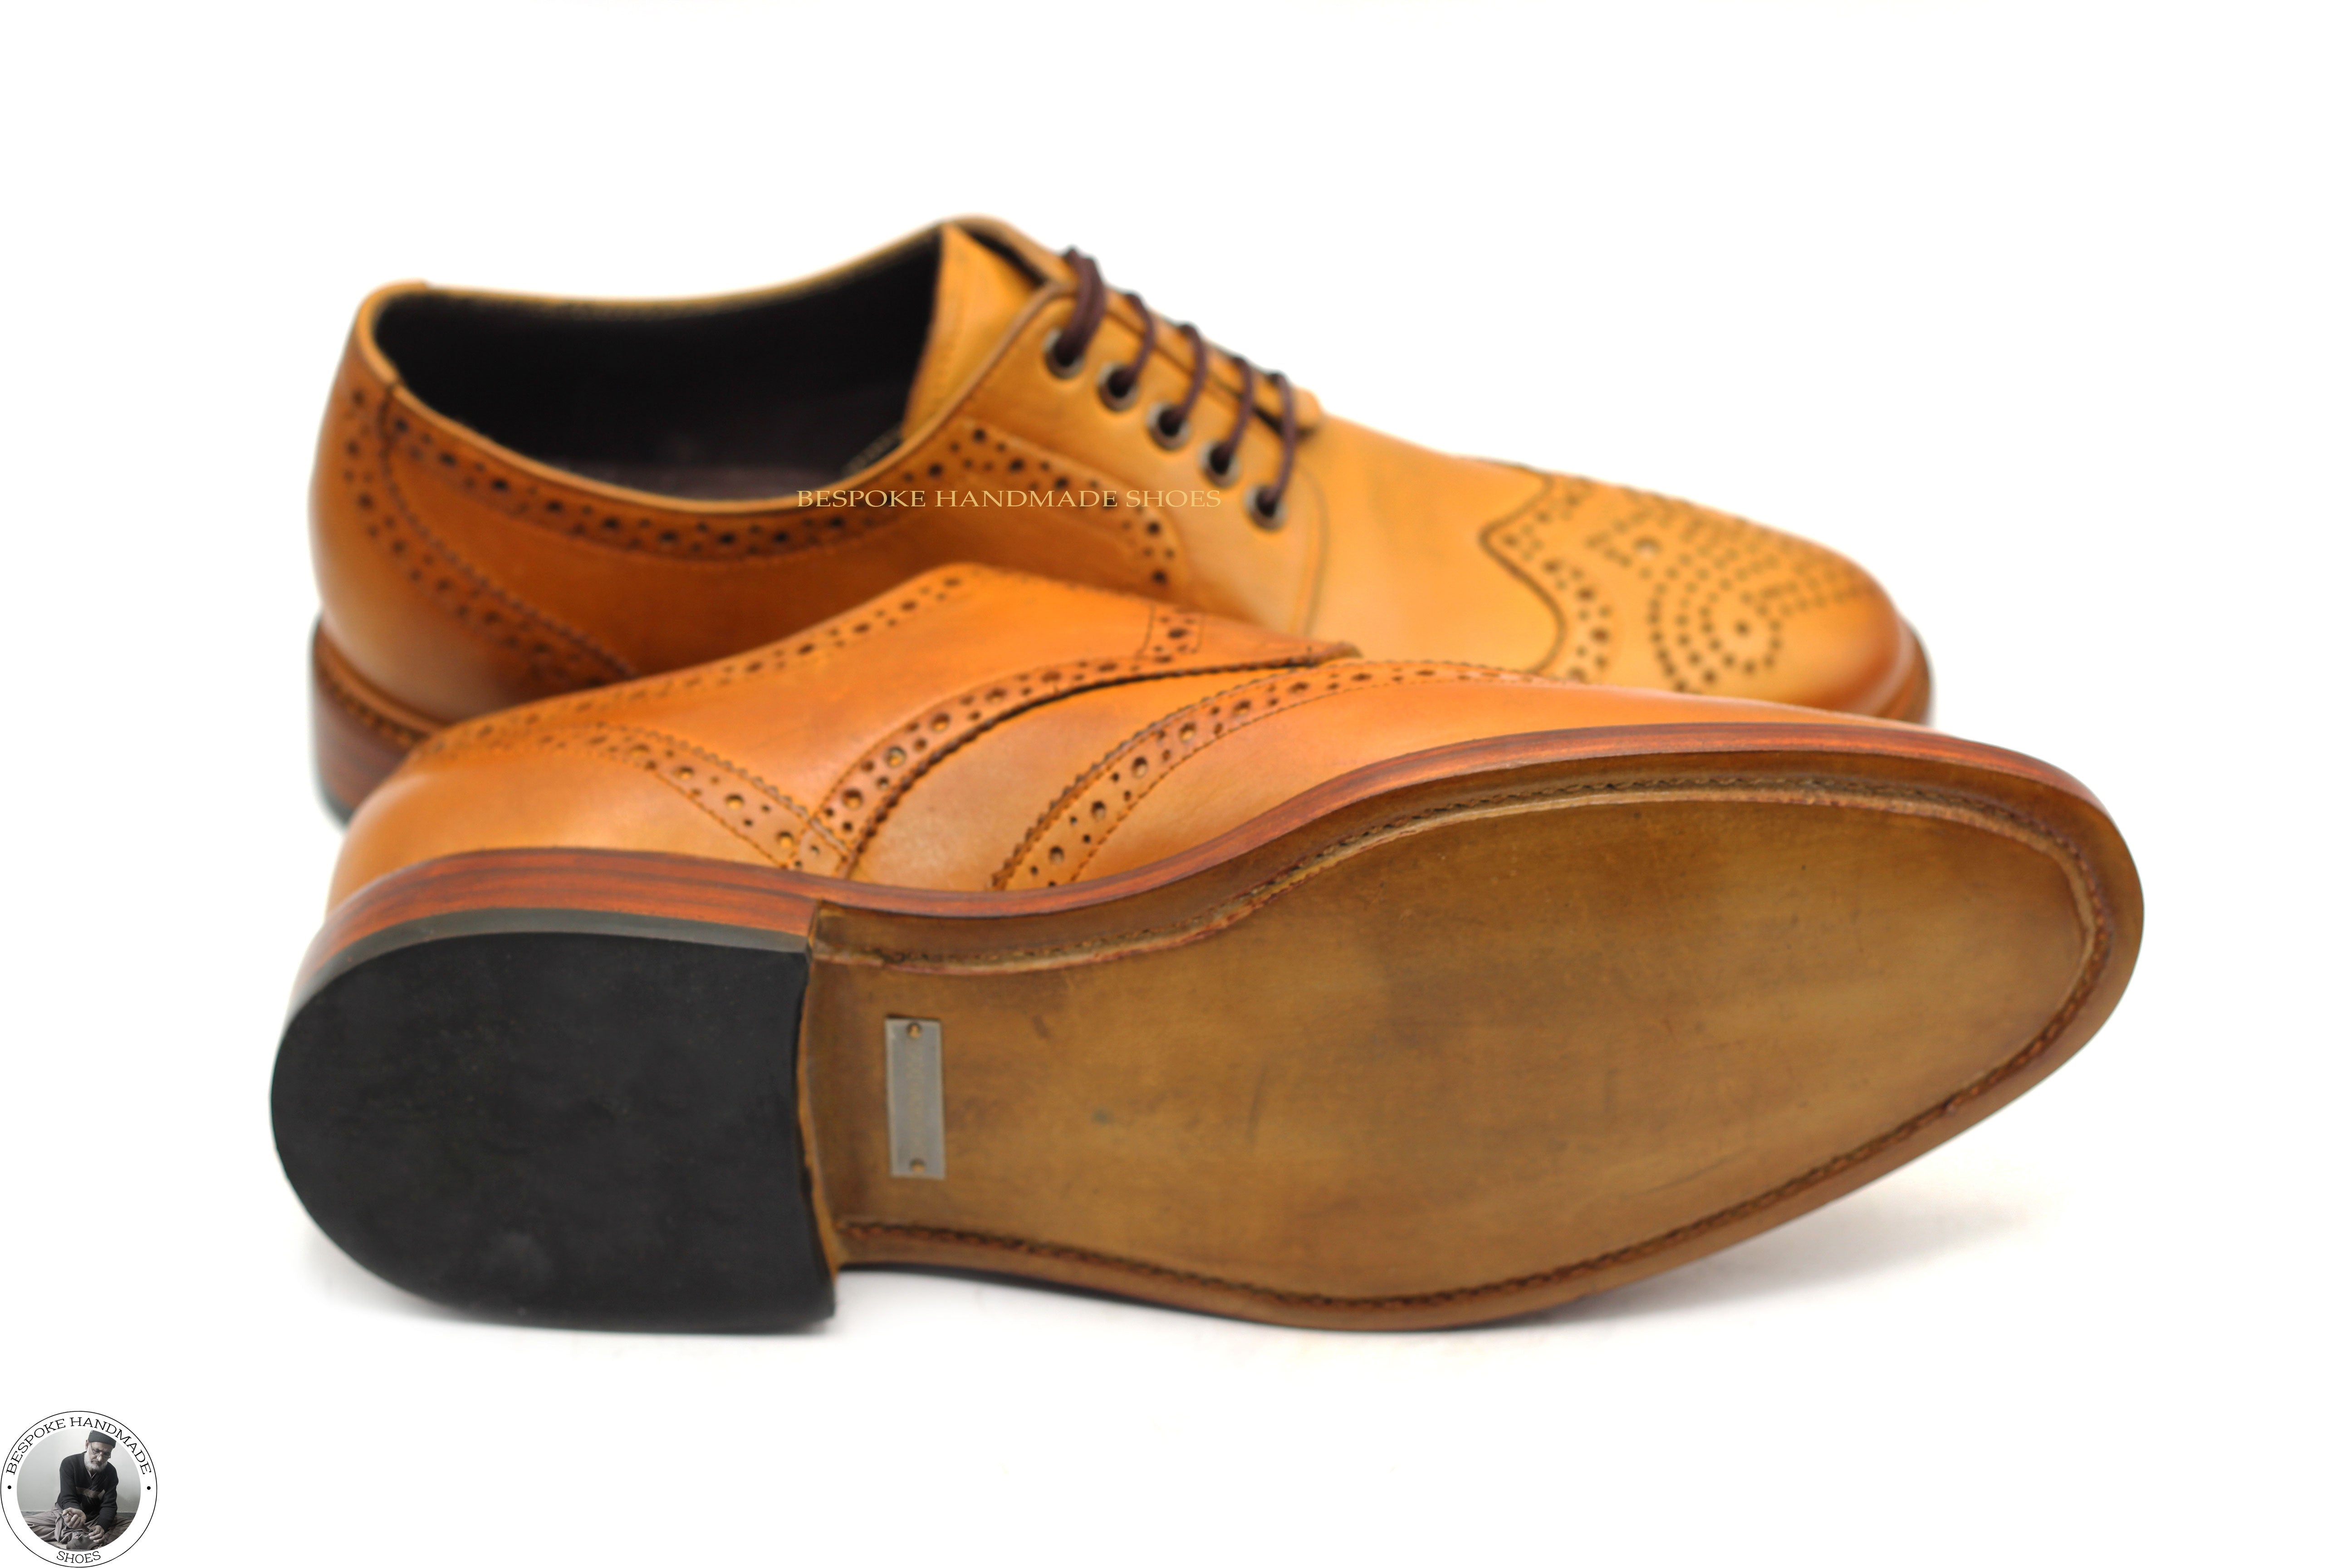 Handmade Men's Tan Leather Wingtip Brogue Oxford Lace Up Shoes For Men's